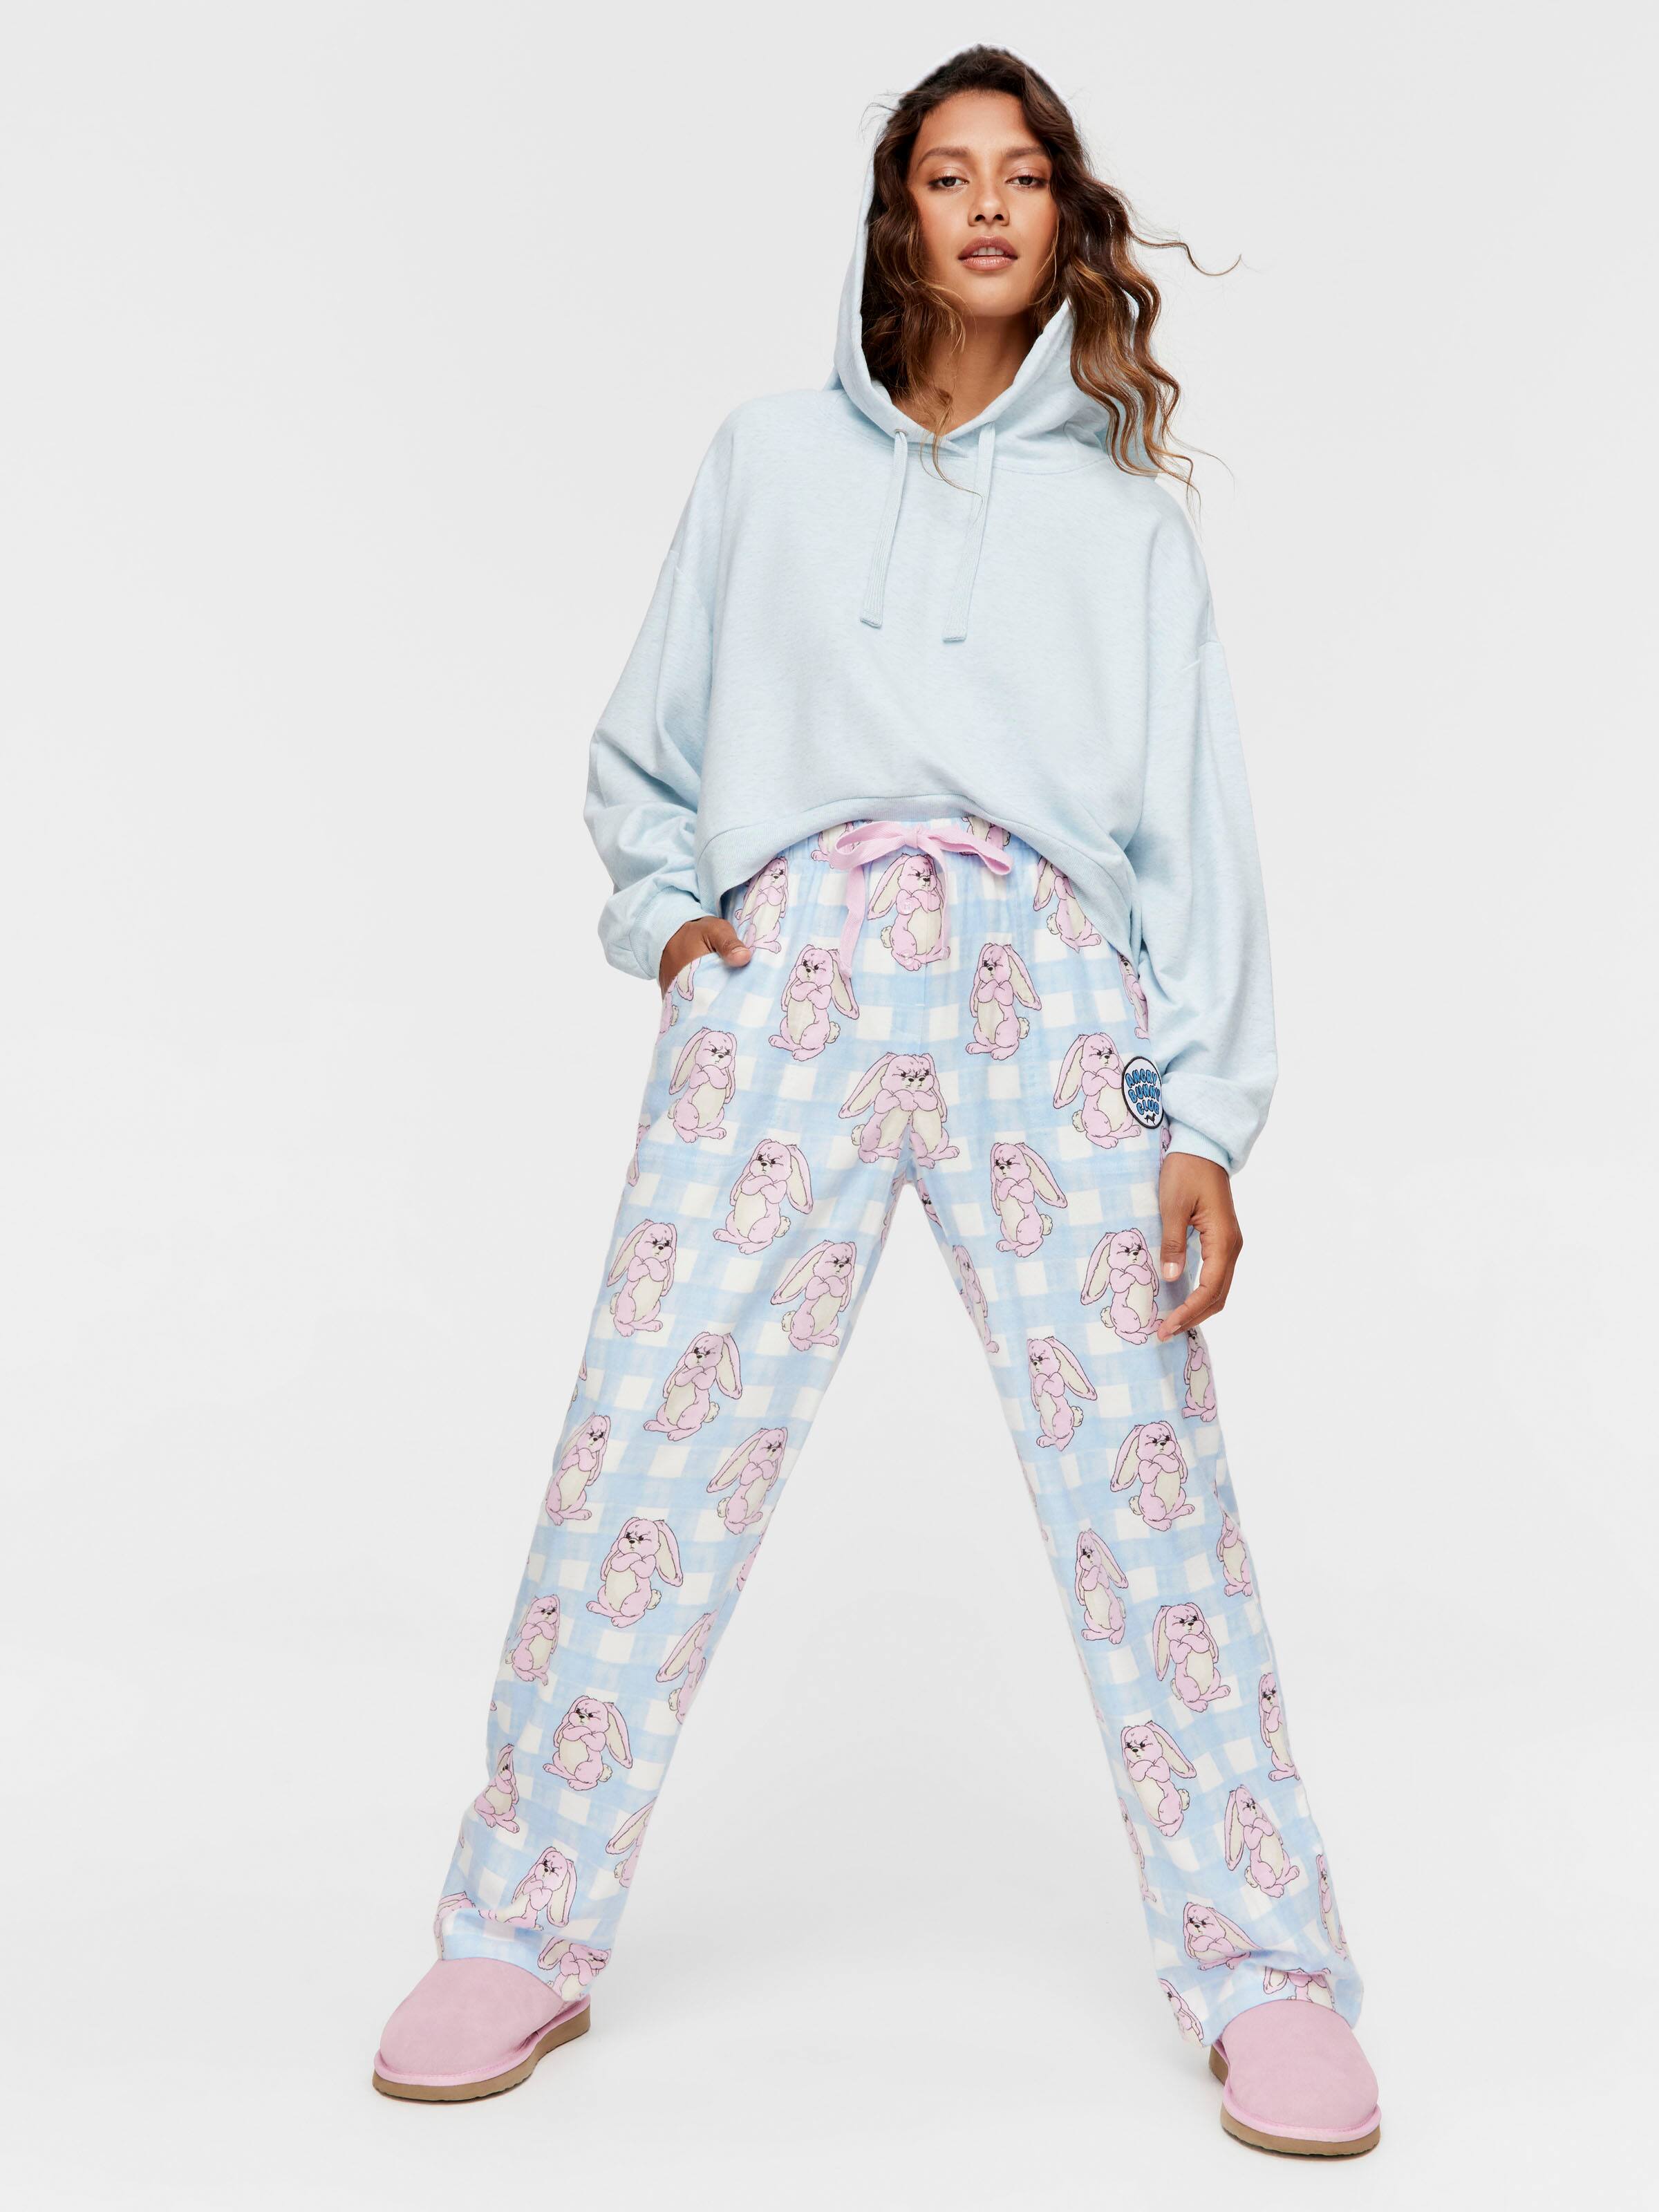 Angry Bunny Bamboo Flannelette Pj Pant